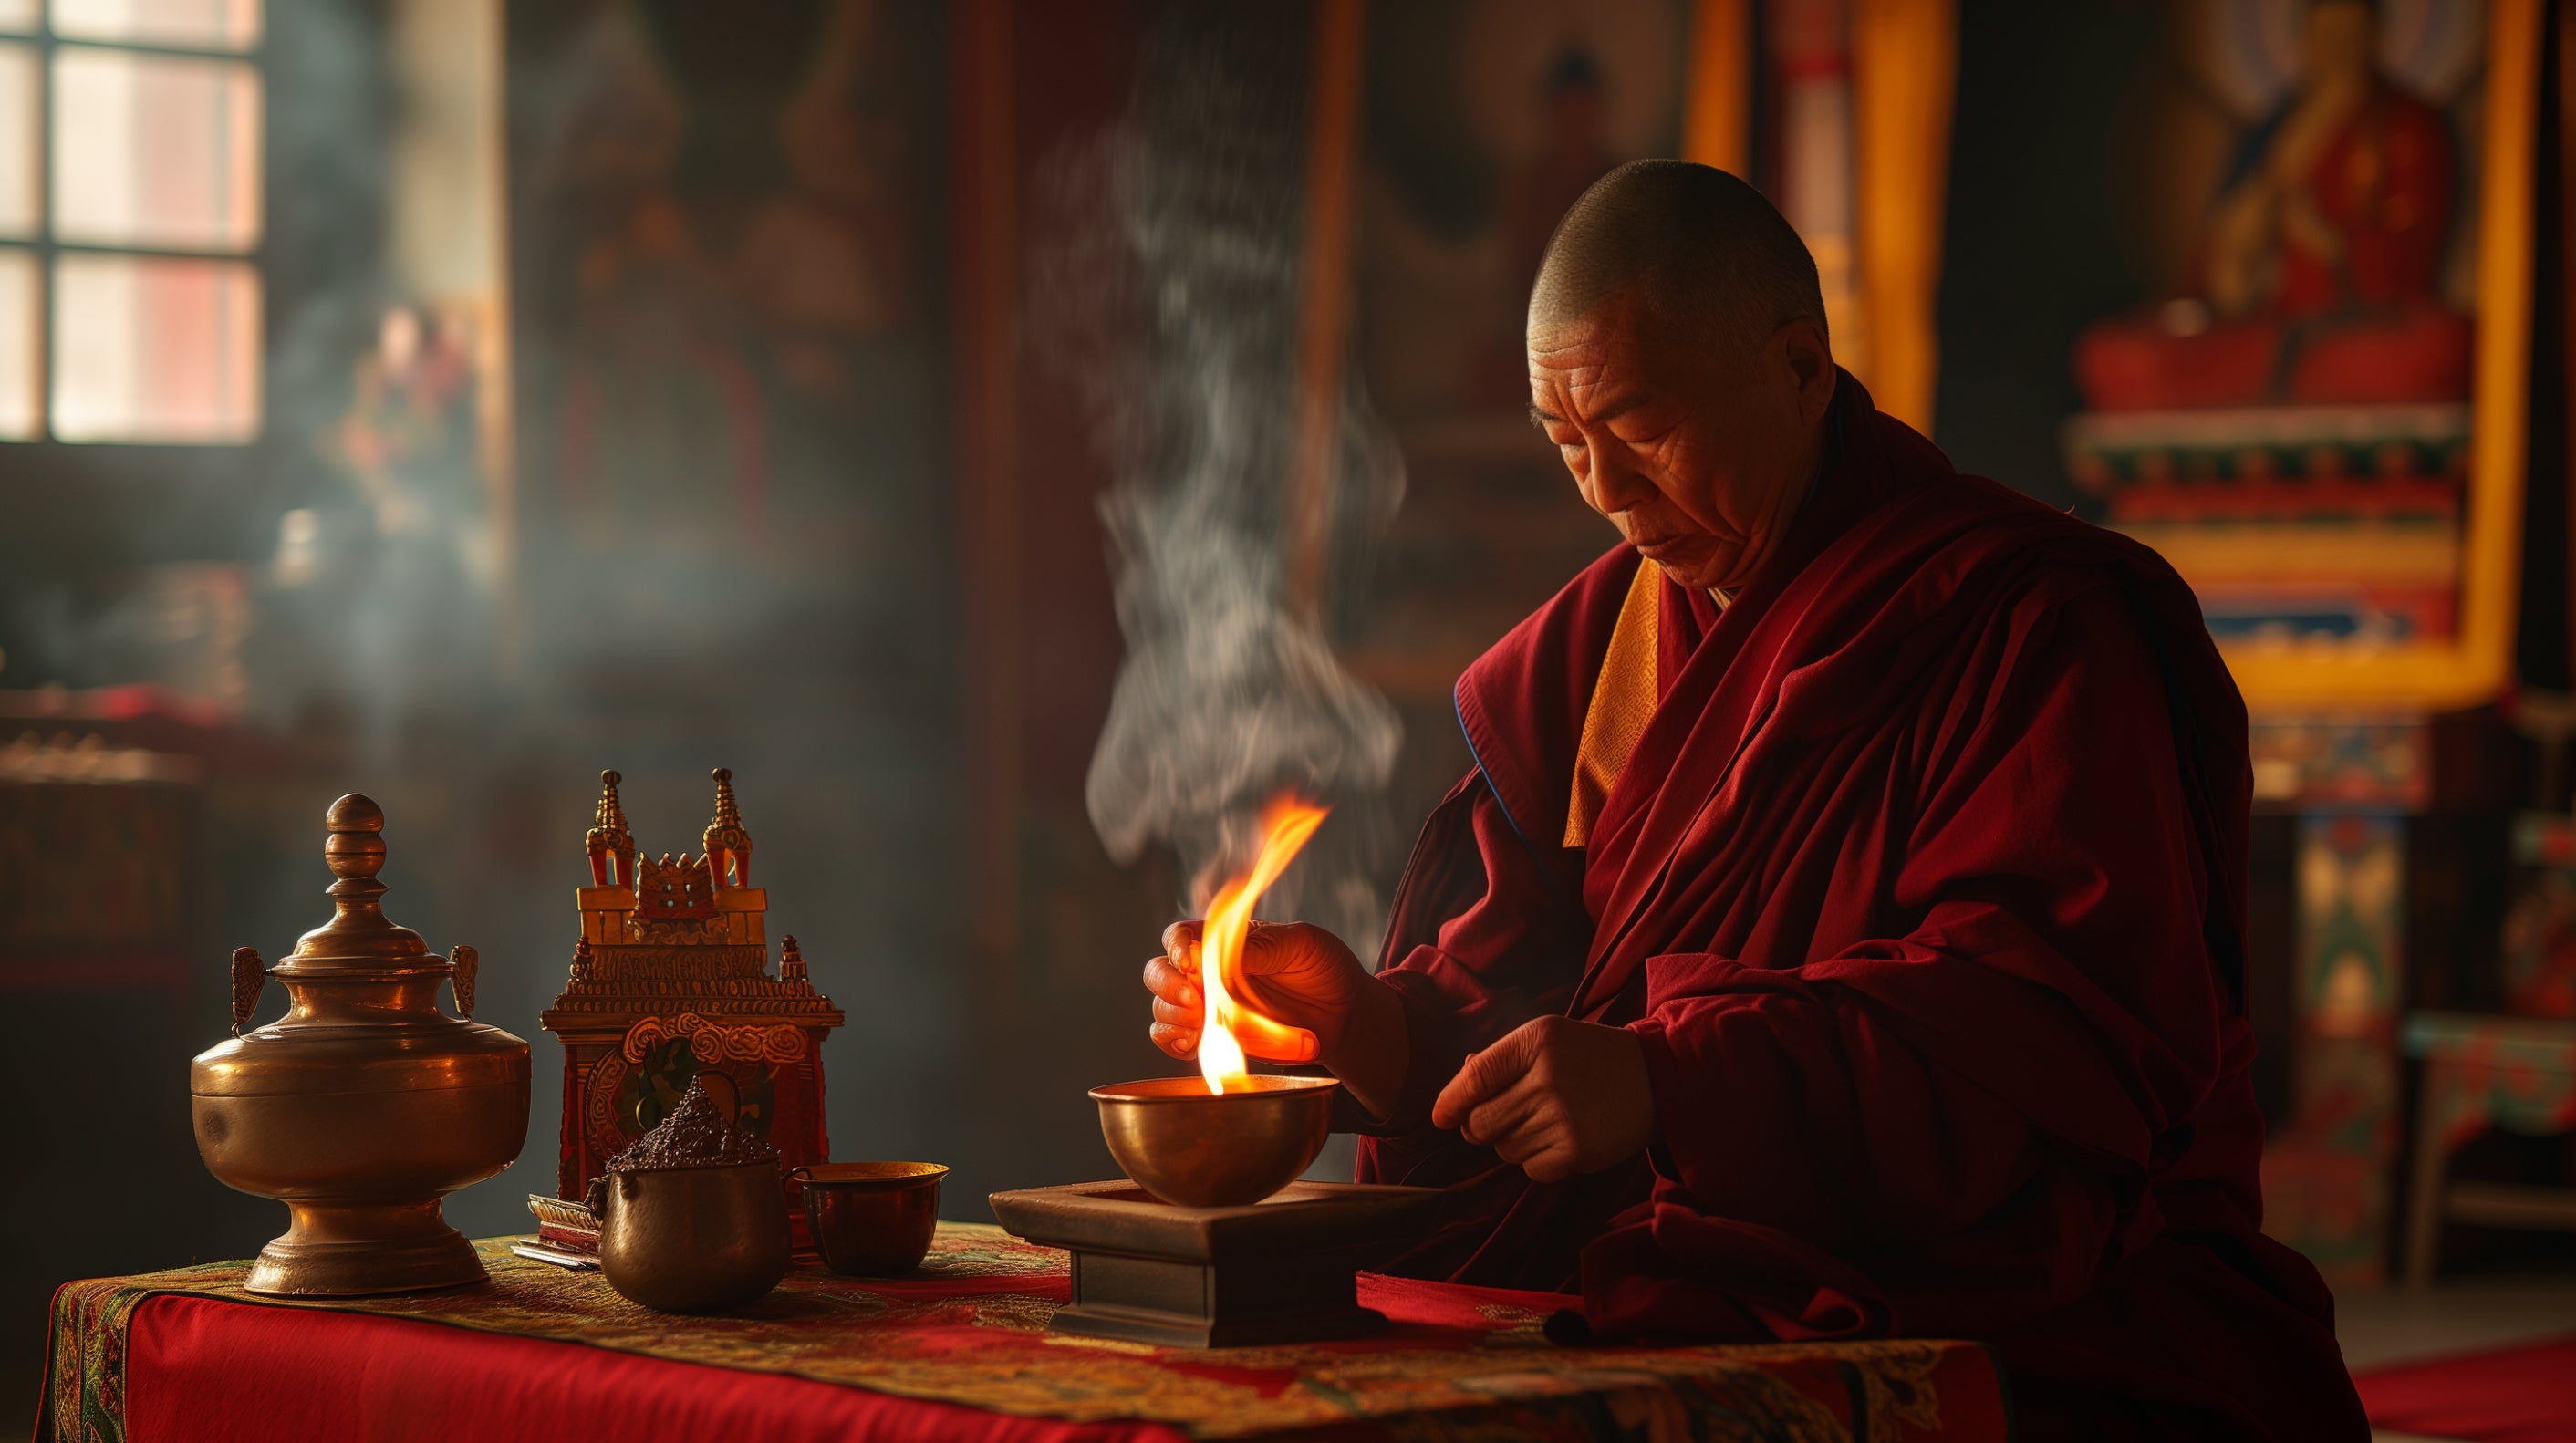 A Tibetan monk in a maroon robe engrossed in a traditional ritual, lighting an offering bowl amidst the sacred ambiance of a Buddhist temple, with ceremonial items and dim, warm lighting enhancing the spiritual mood.